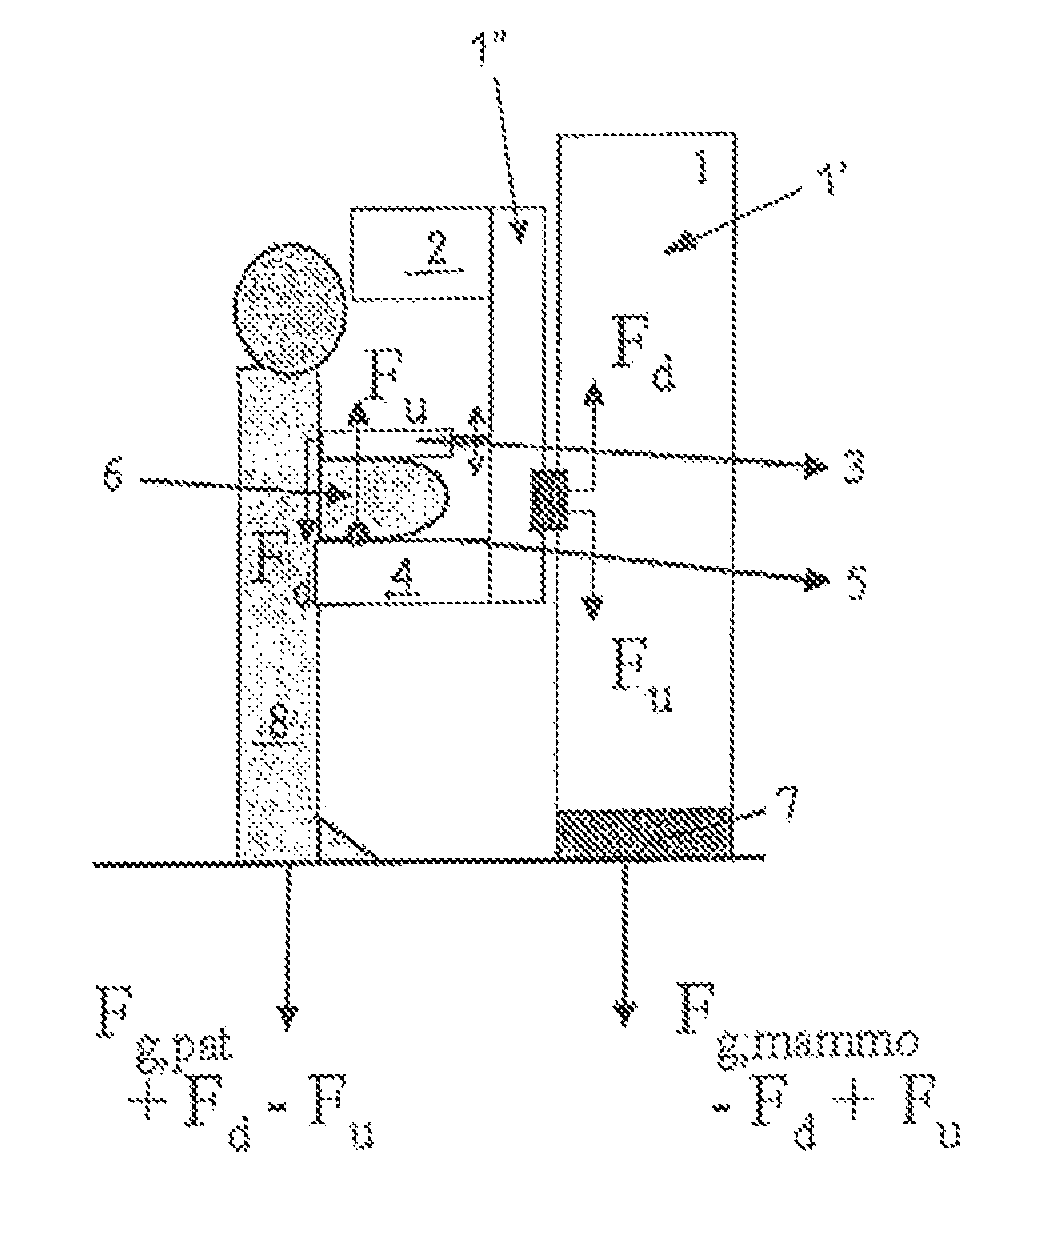 Mammography apparatus and method to adjust or tune the mechanical settings of such a mammography apparatus